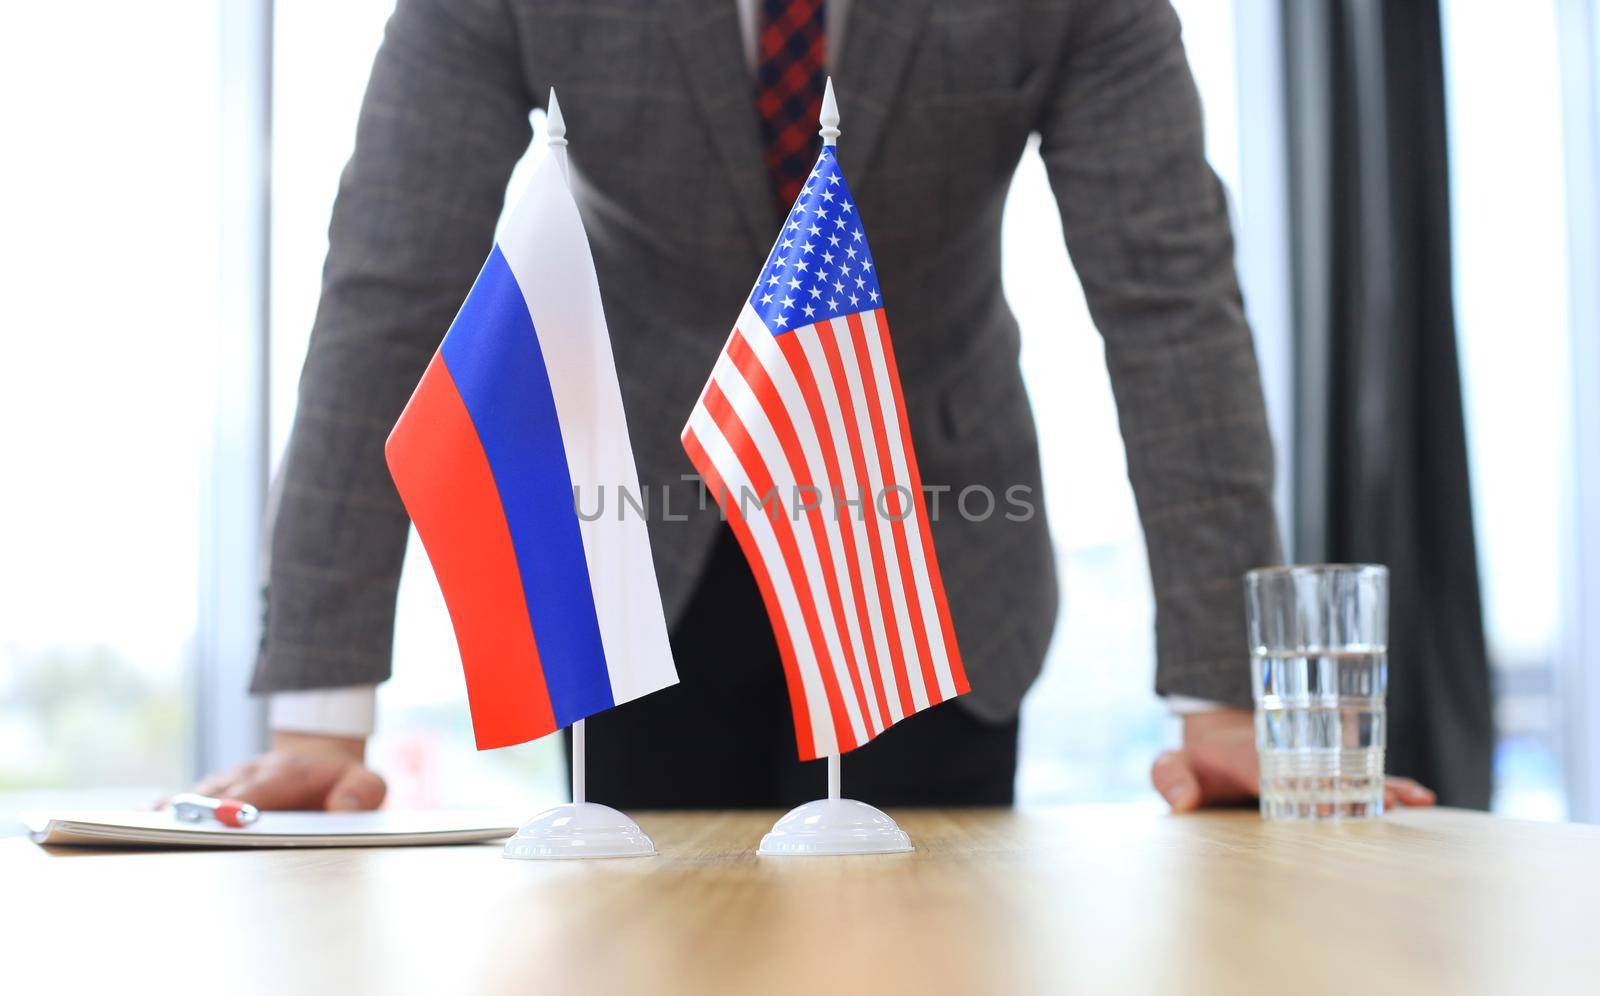 Russian flag and flag of European Union with businessman near by